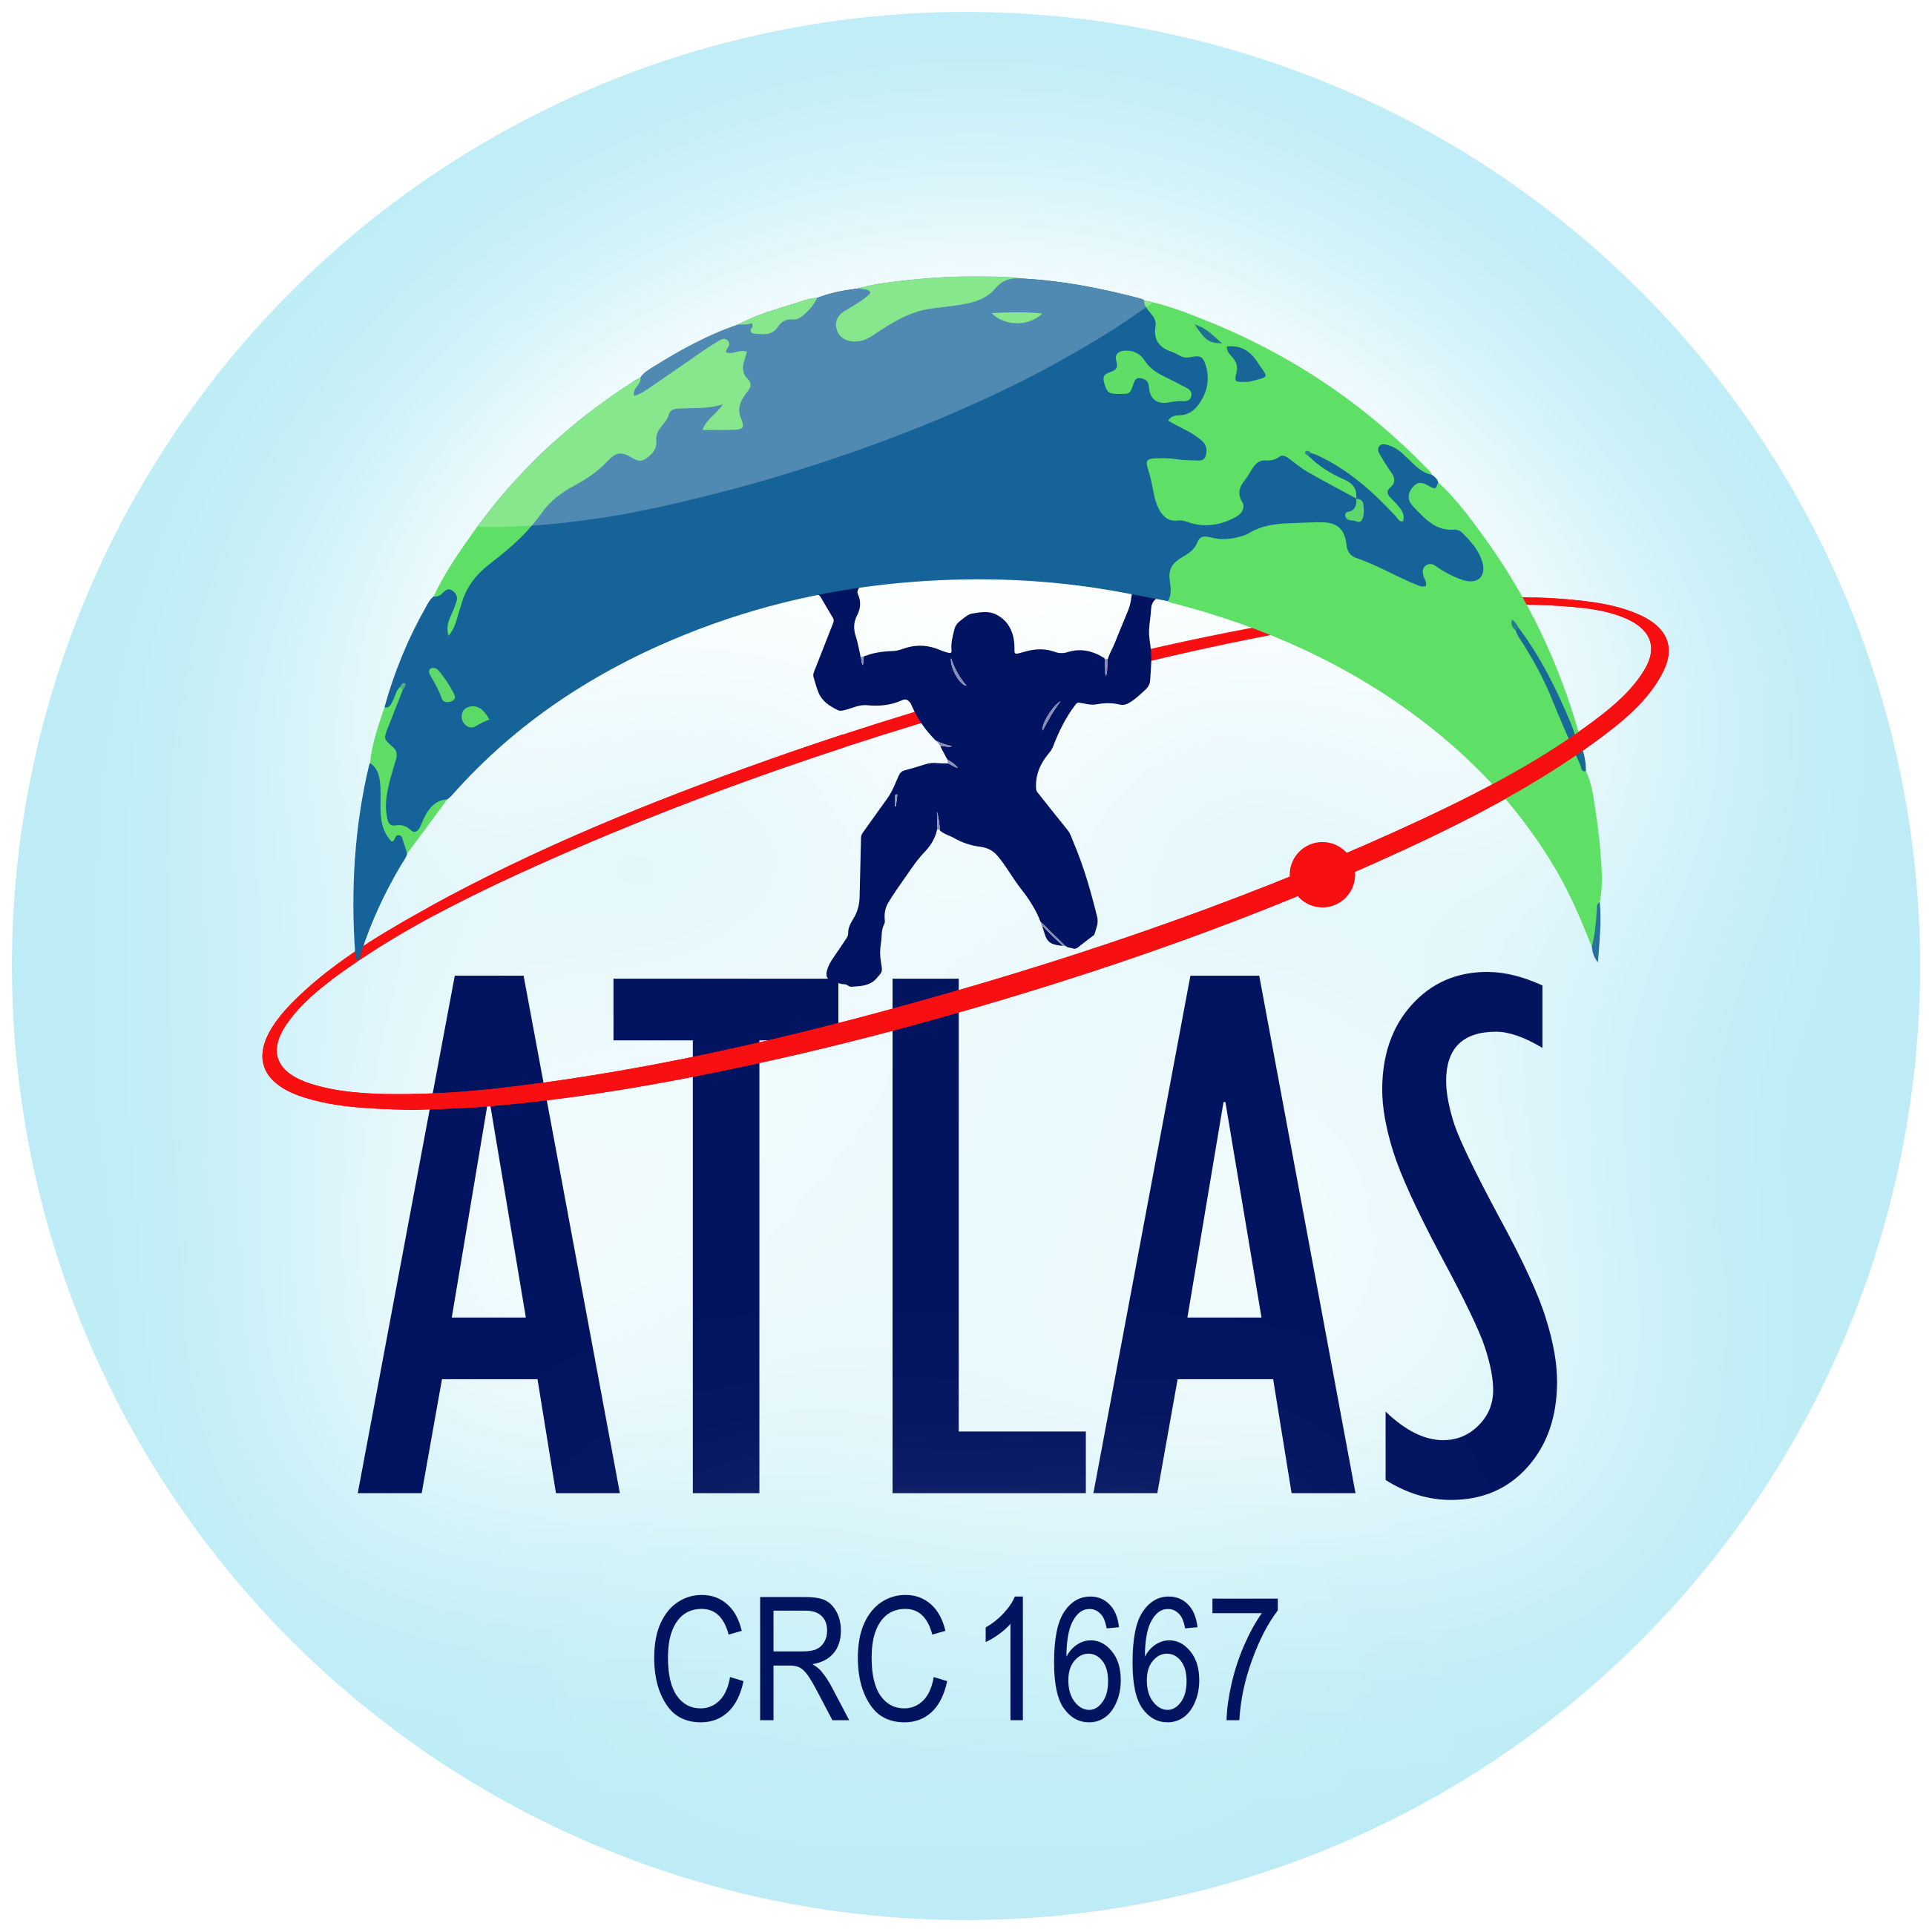 The logo of the CRC 1667 ATLAS